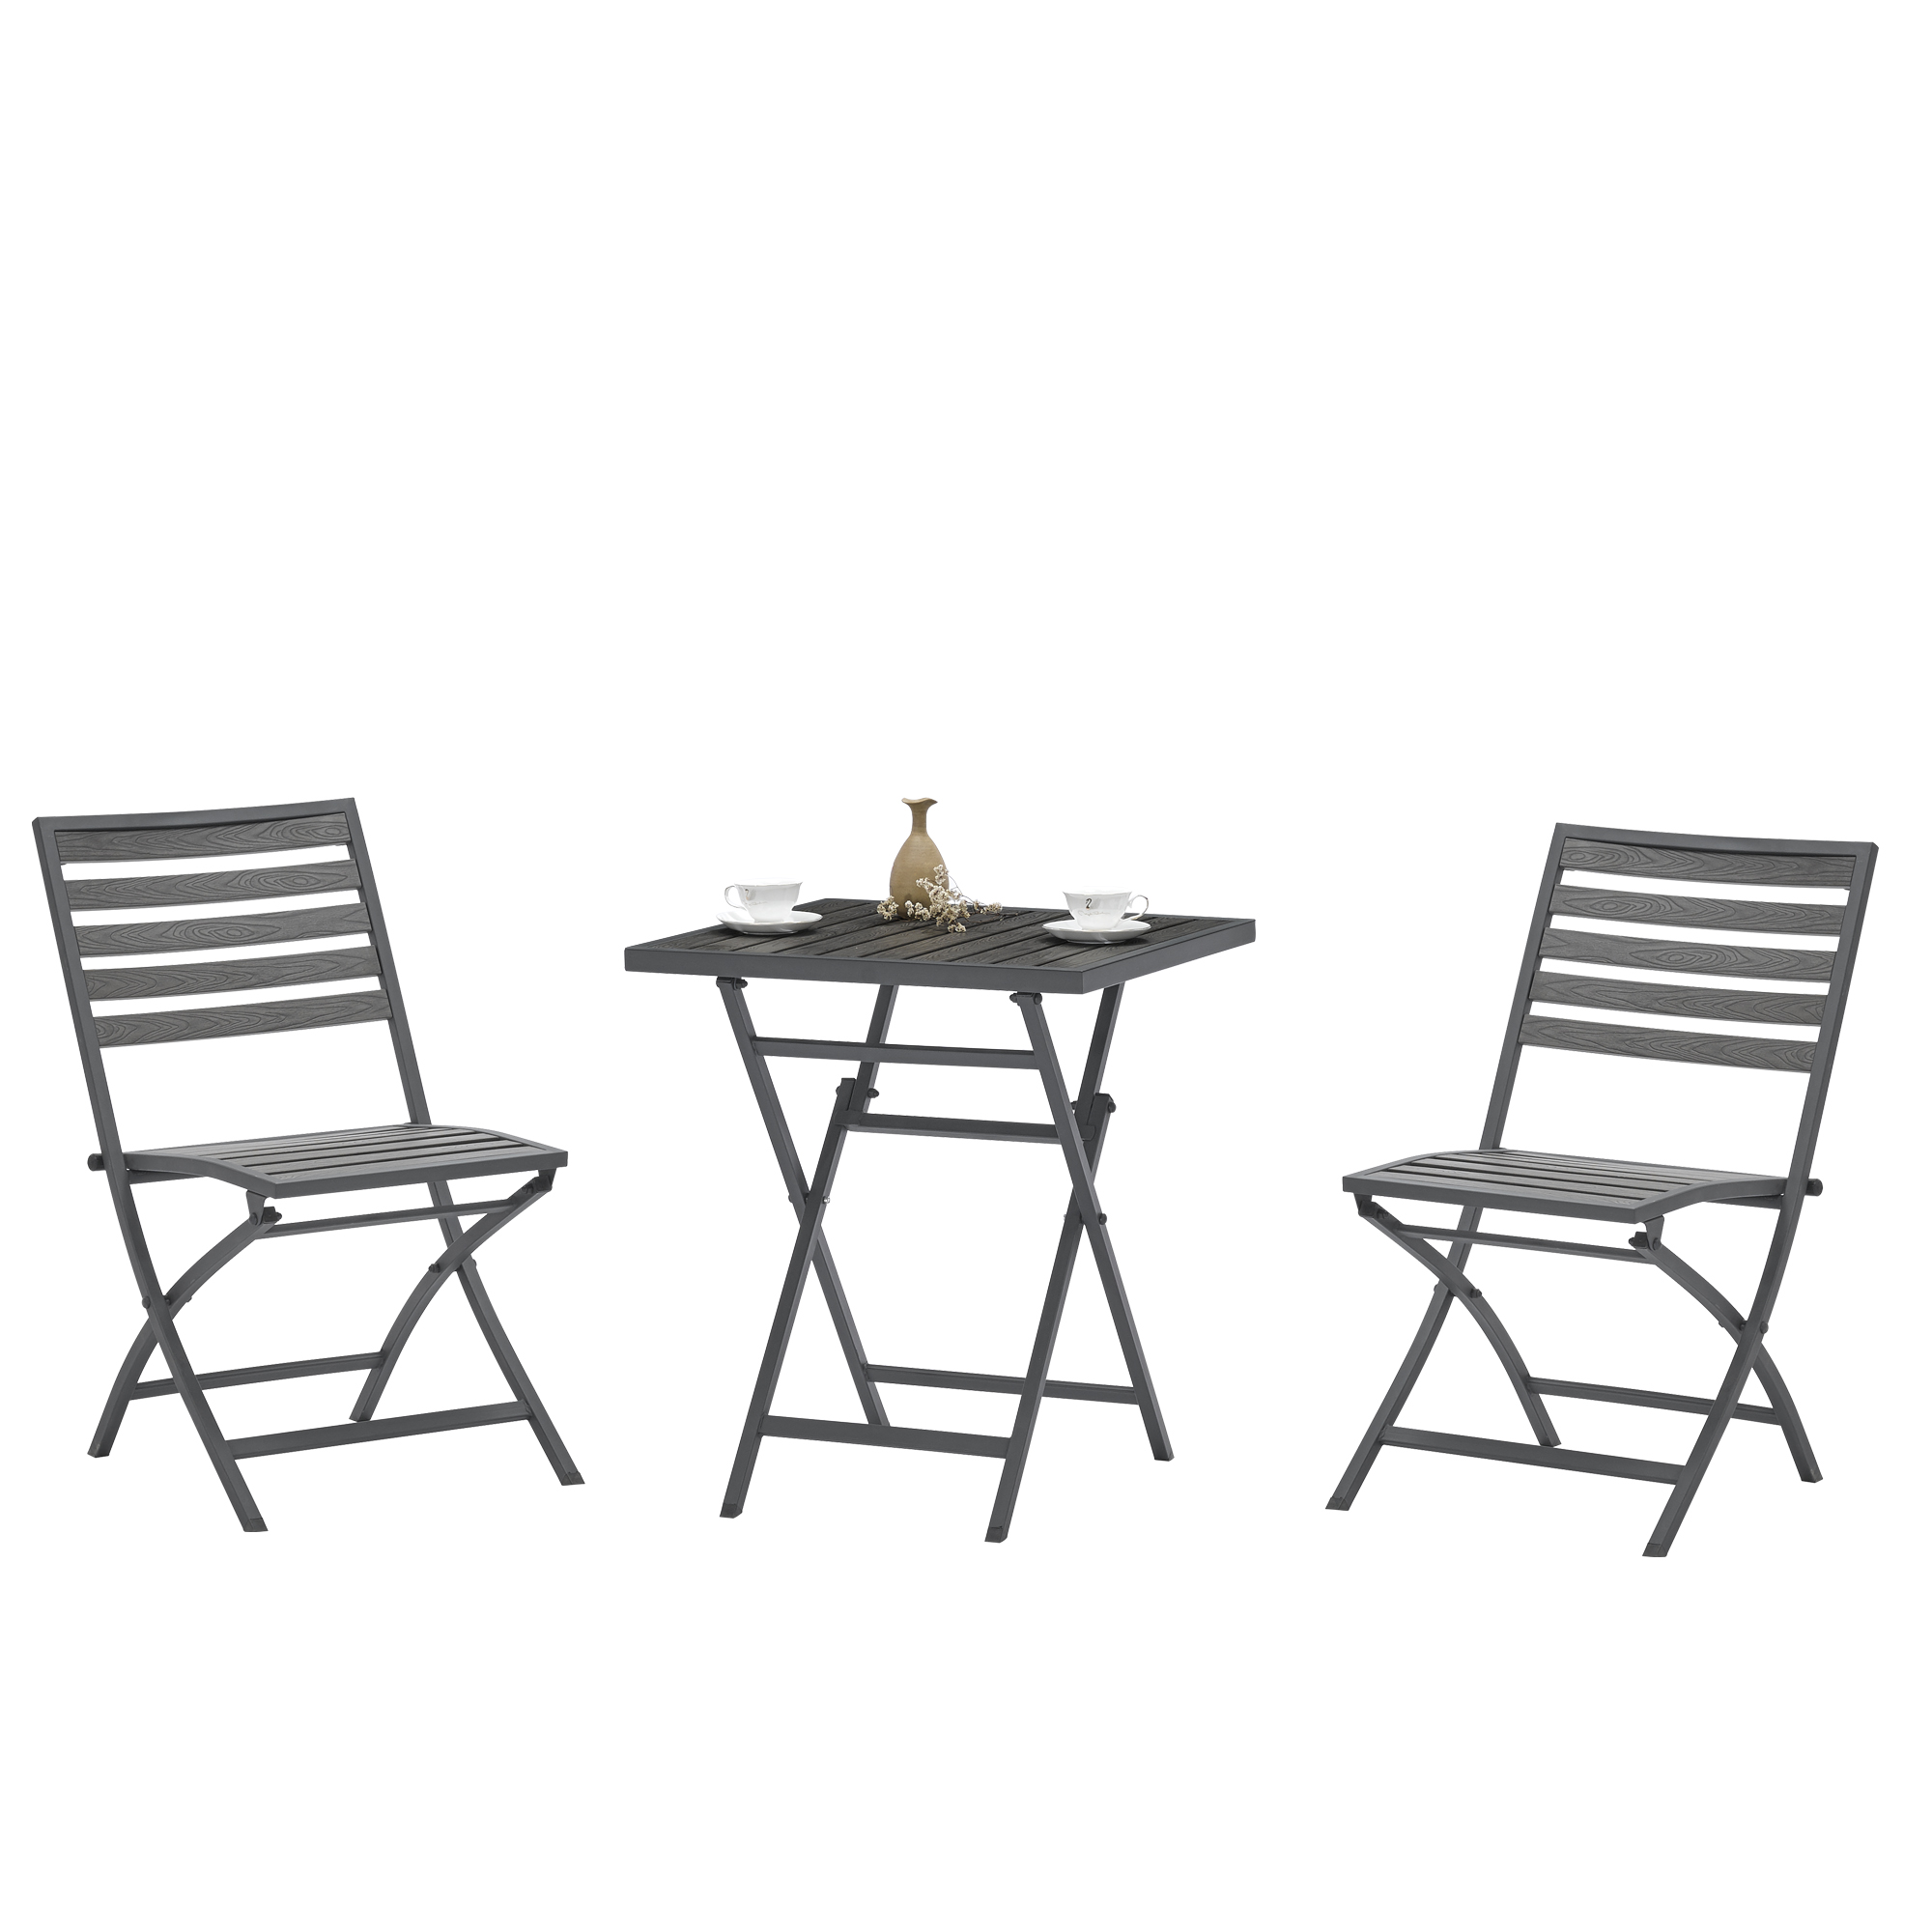 Modern outdoor plastic wood folding table and chair,Garden Furniture 3PCS (2 Chairs+1 table)-CASAINC